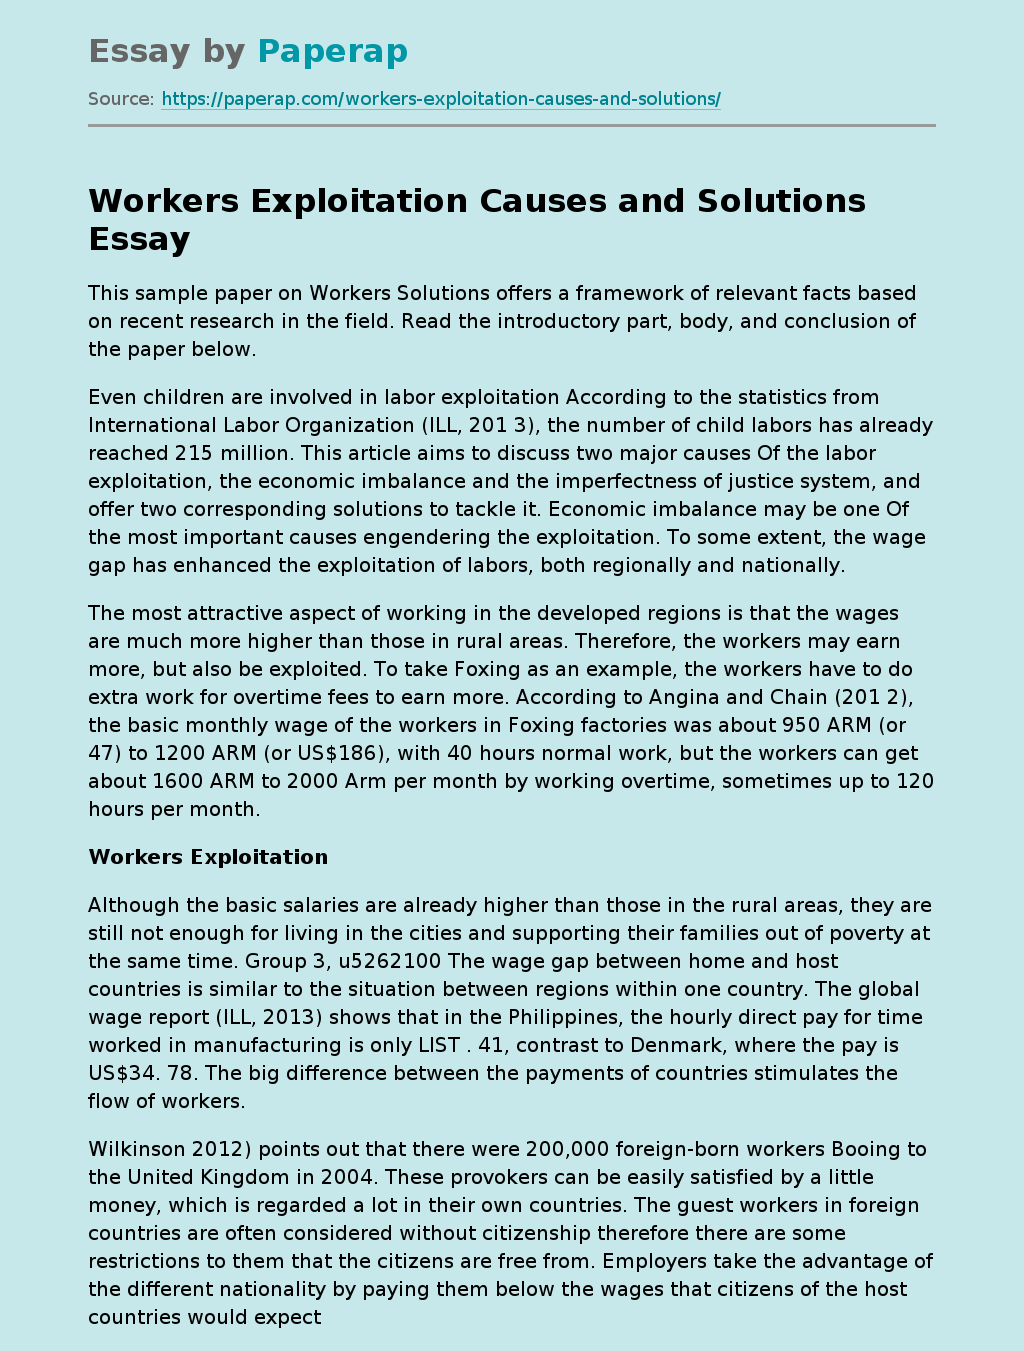 Workers Exploitation Causes and Solutions